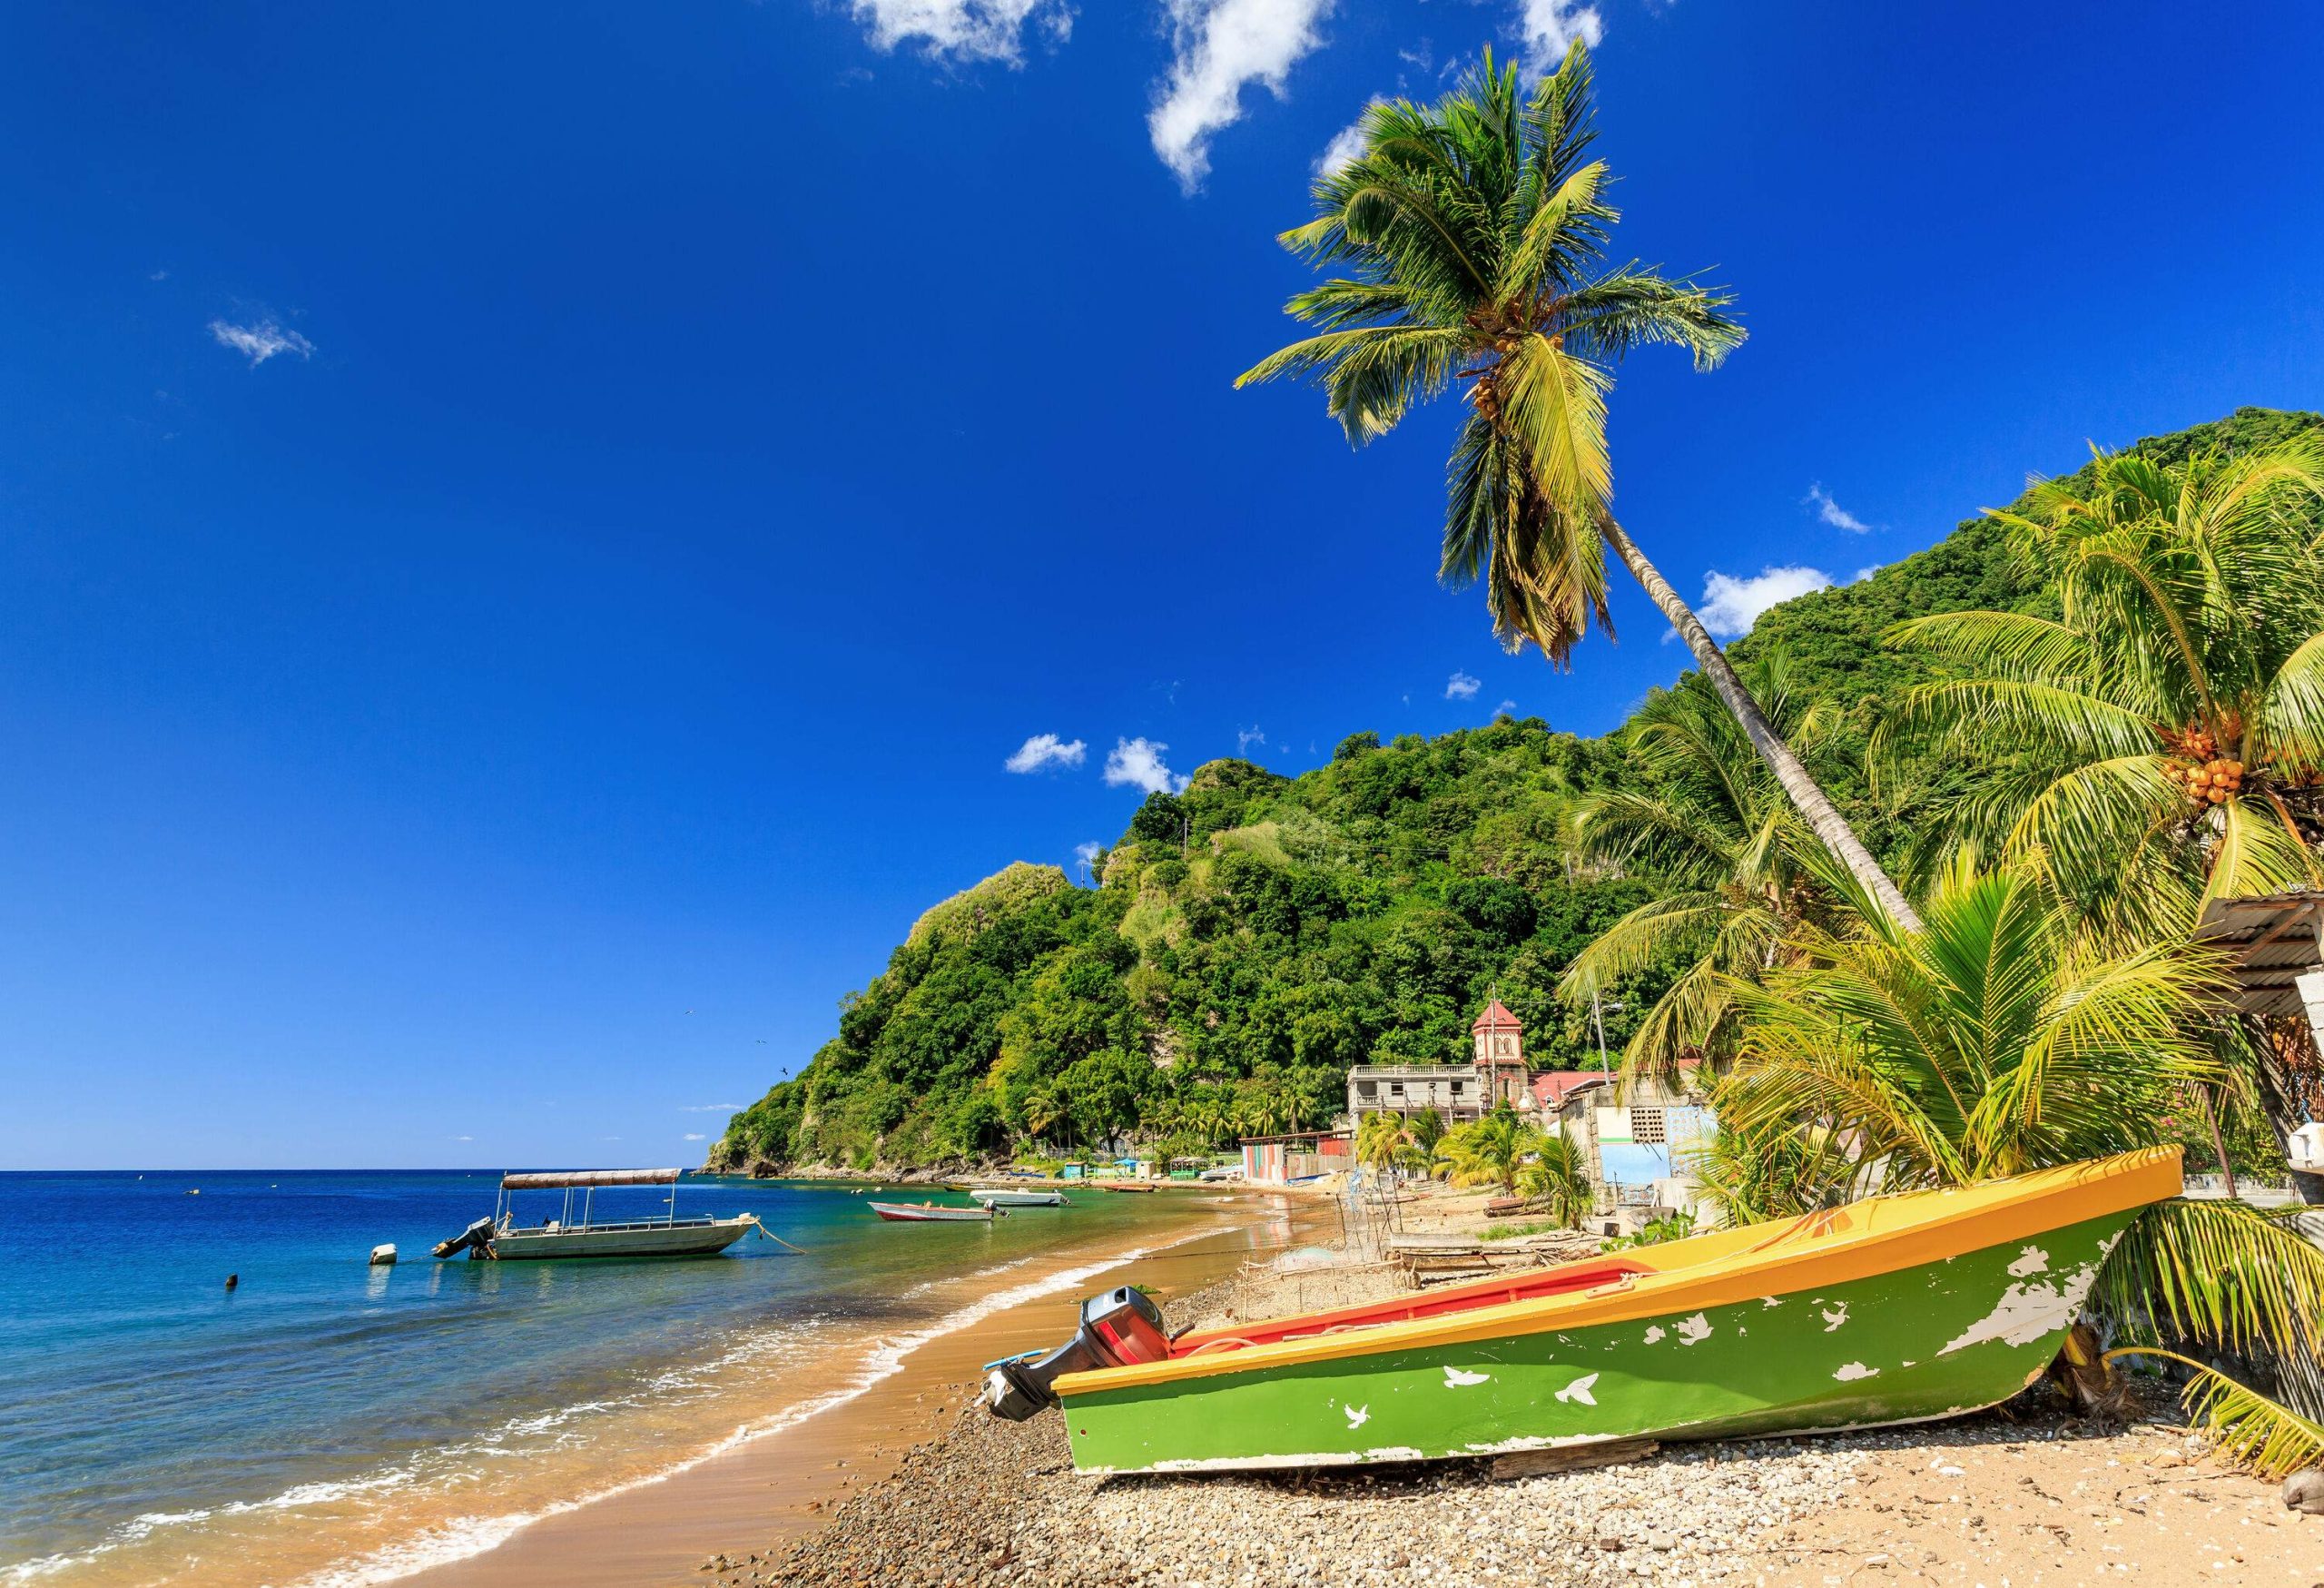 A boat stranded on the sandy beach is accompanied by a towering palm tree, while buildings and wooded slopes provide a picturesque backdrop.